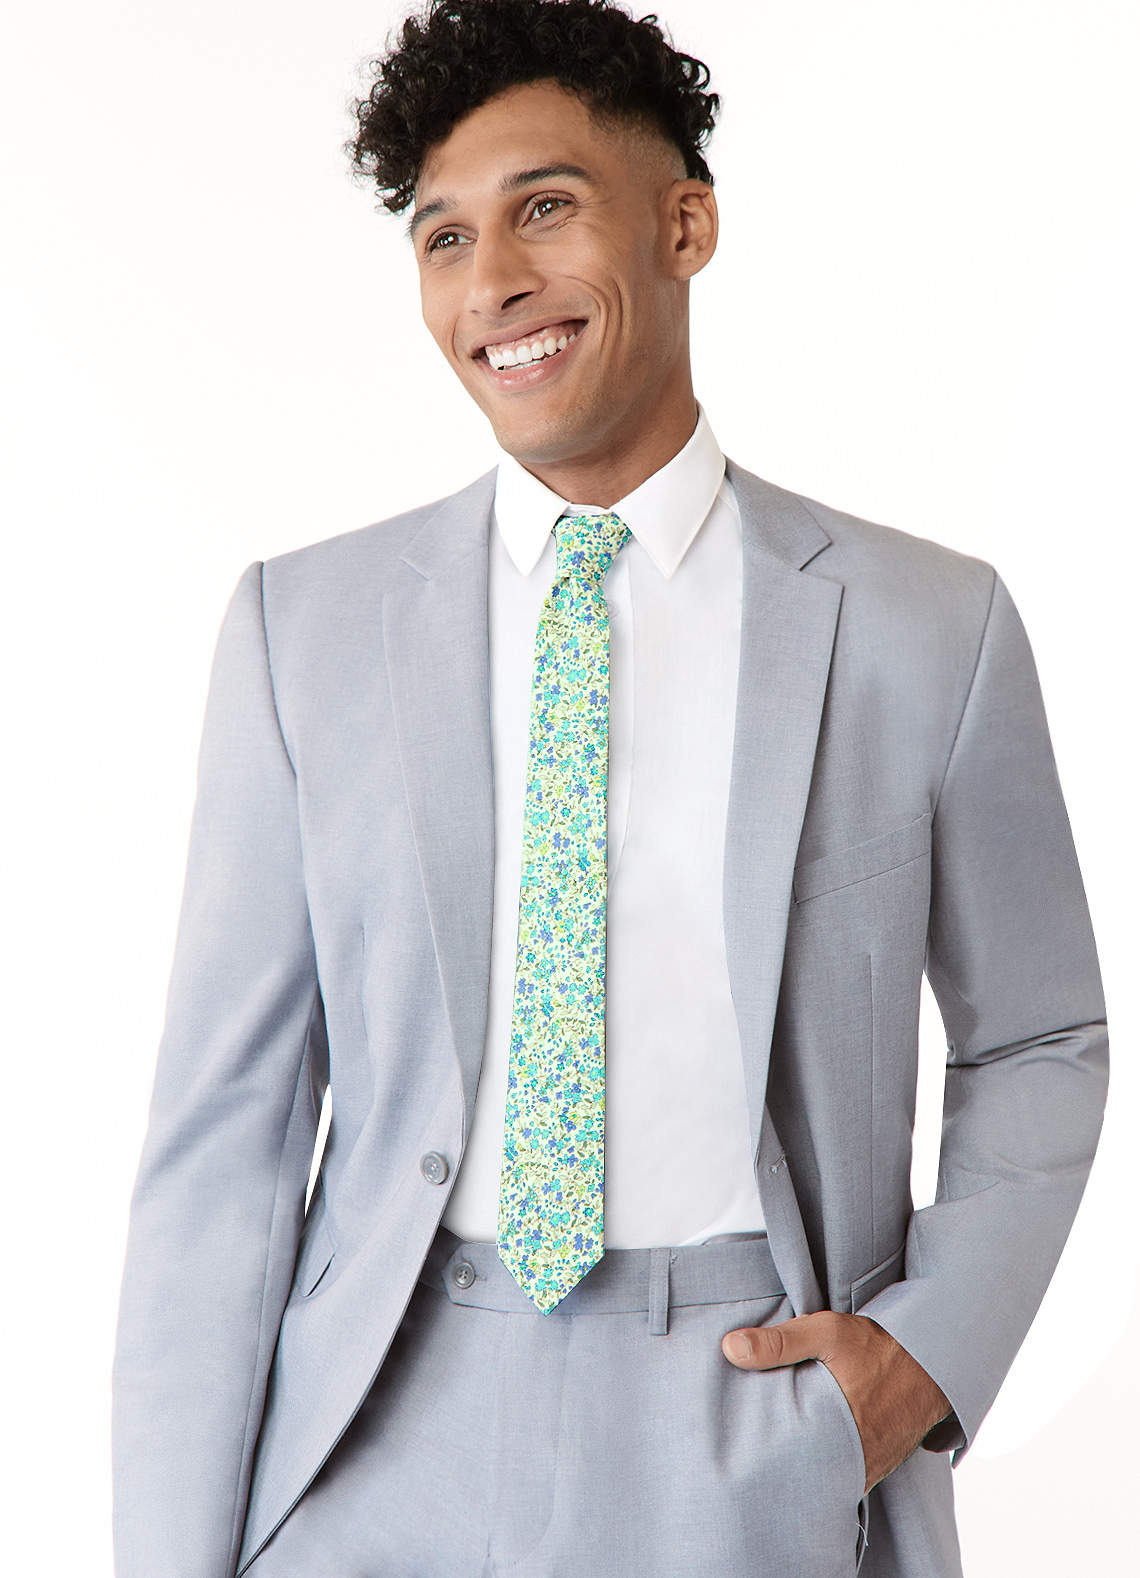 front Green Meadow Floral Skinny Tie